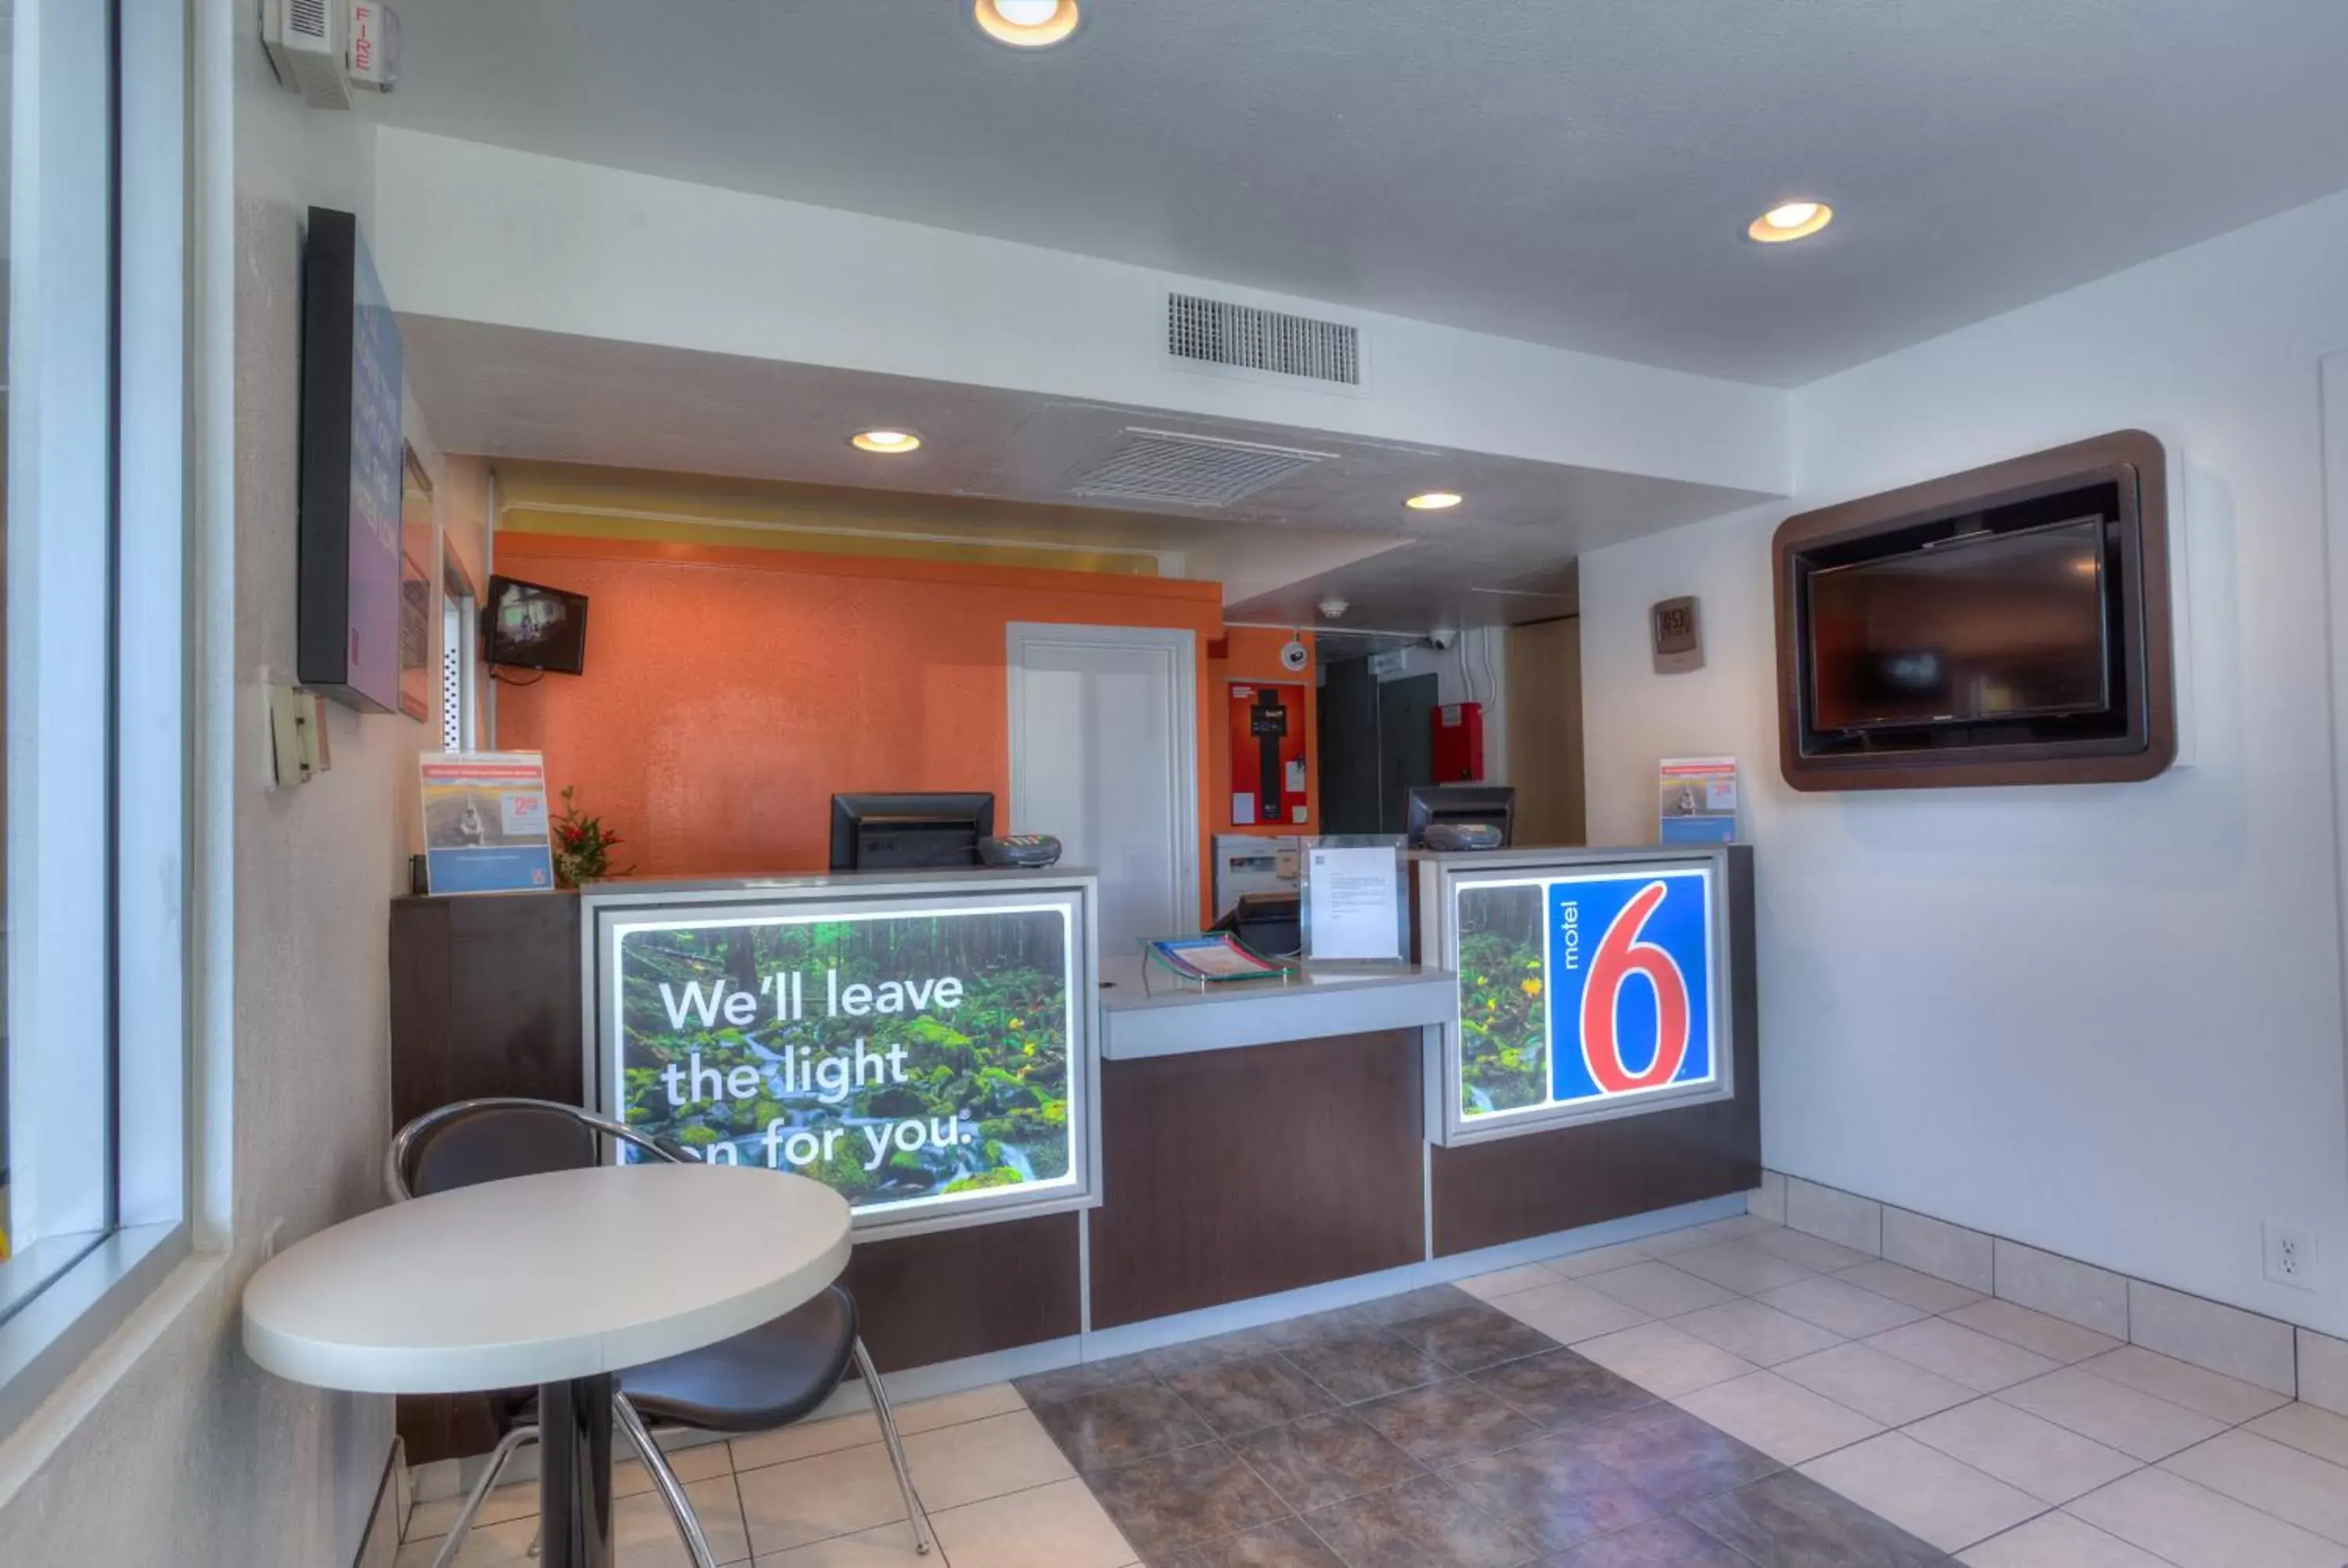 Lobby or reception in Motel 6-Troutdale, OR - Portland East